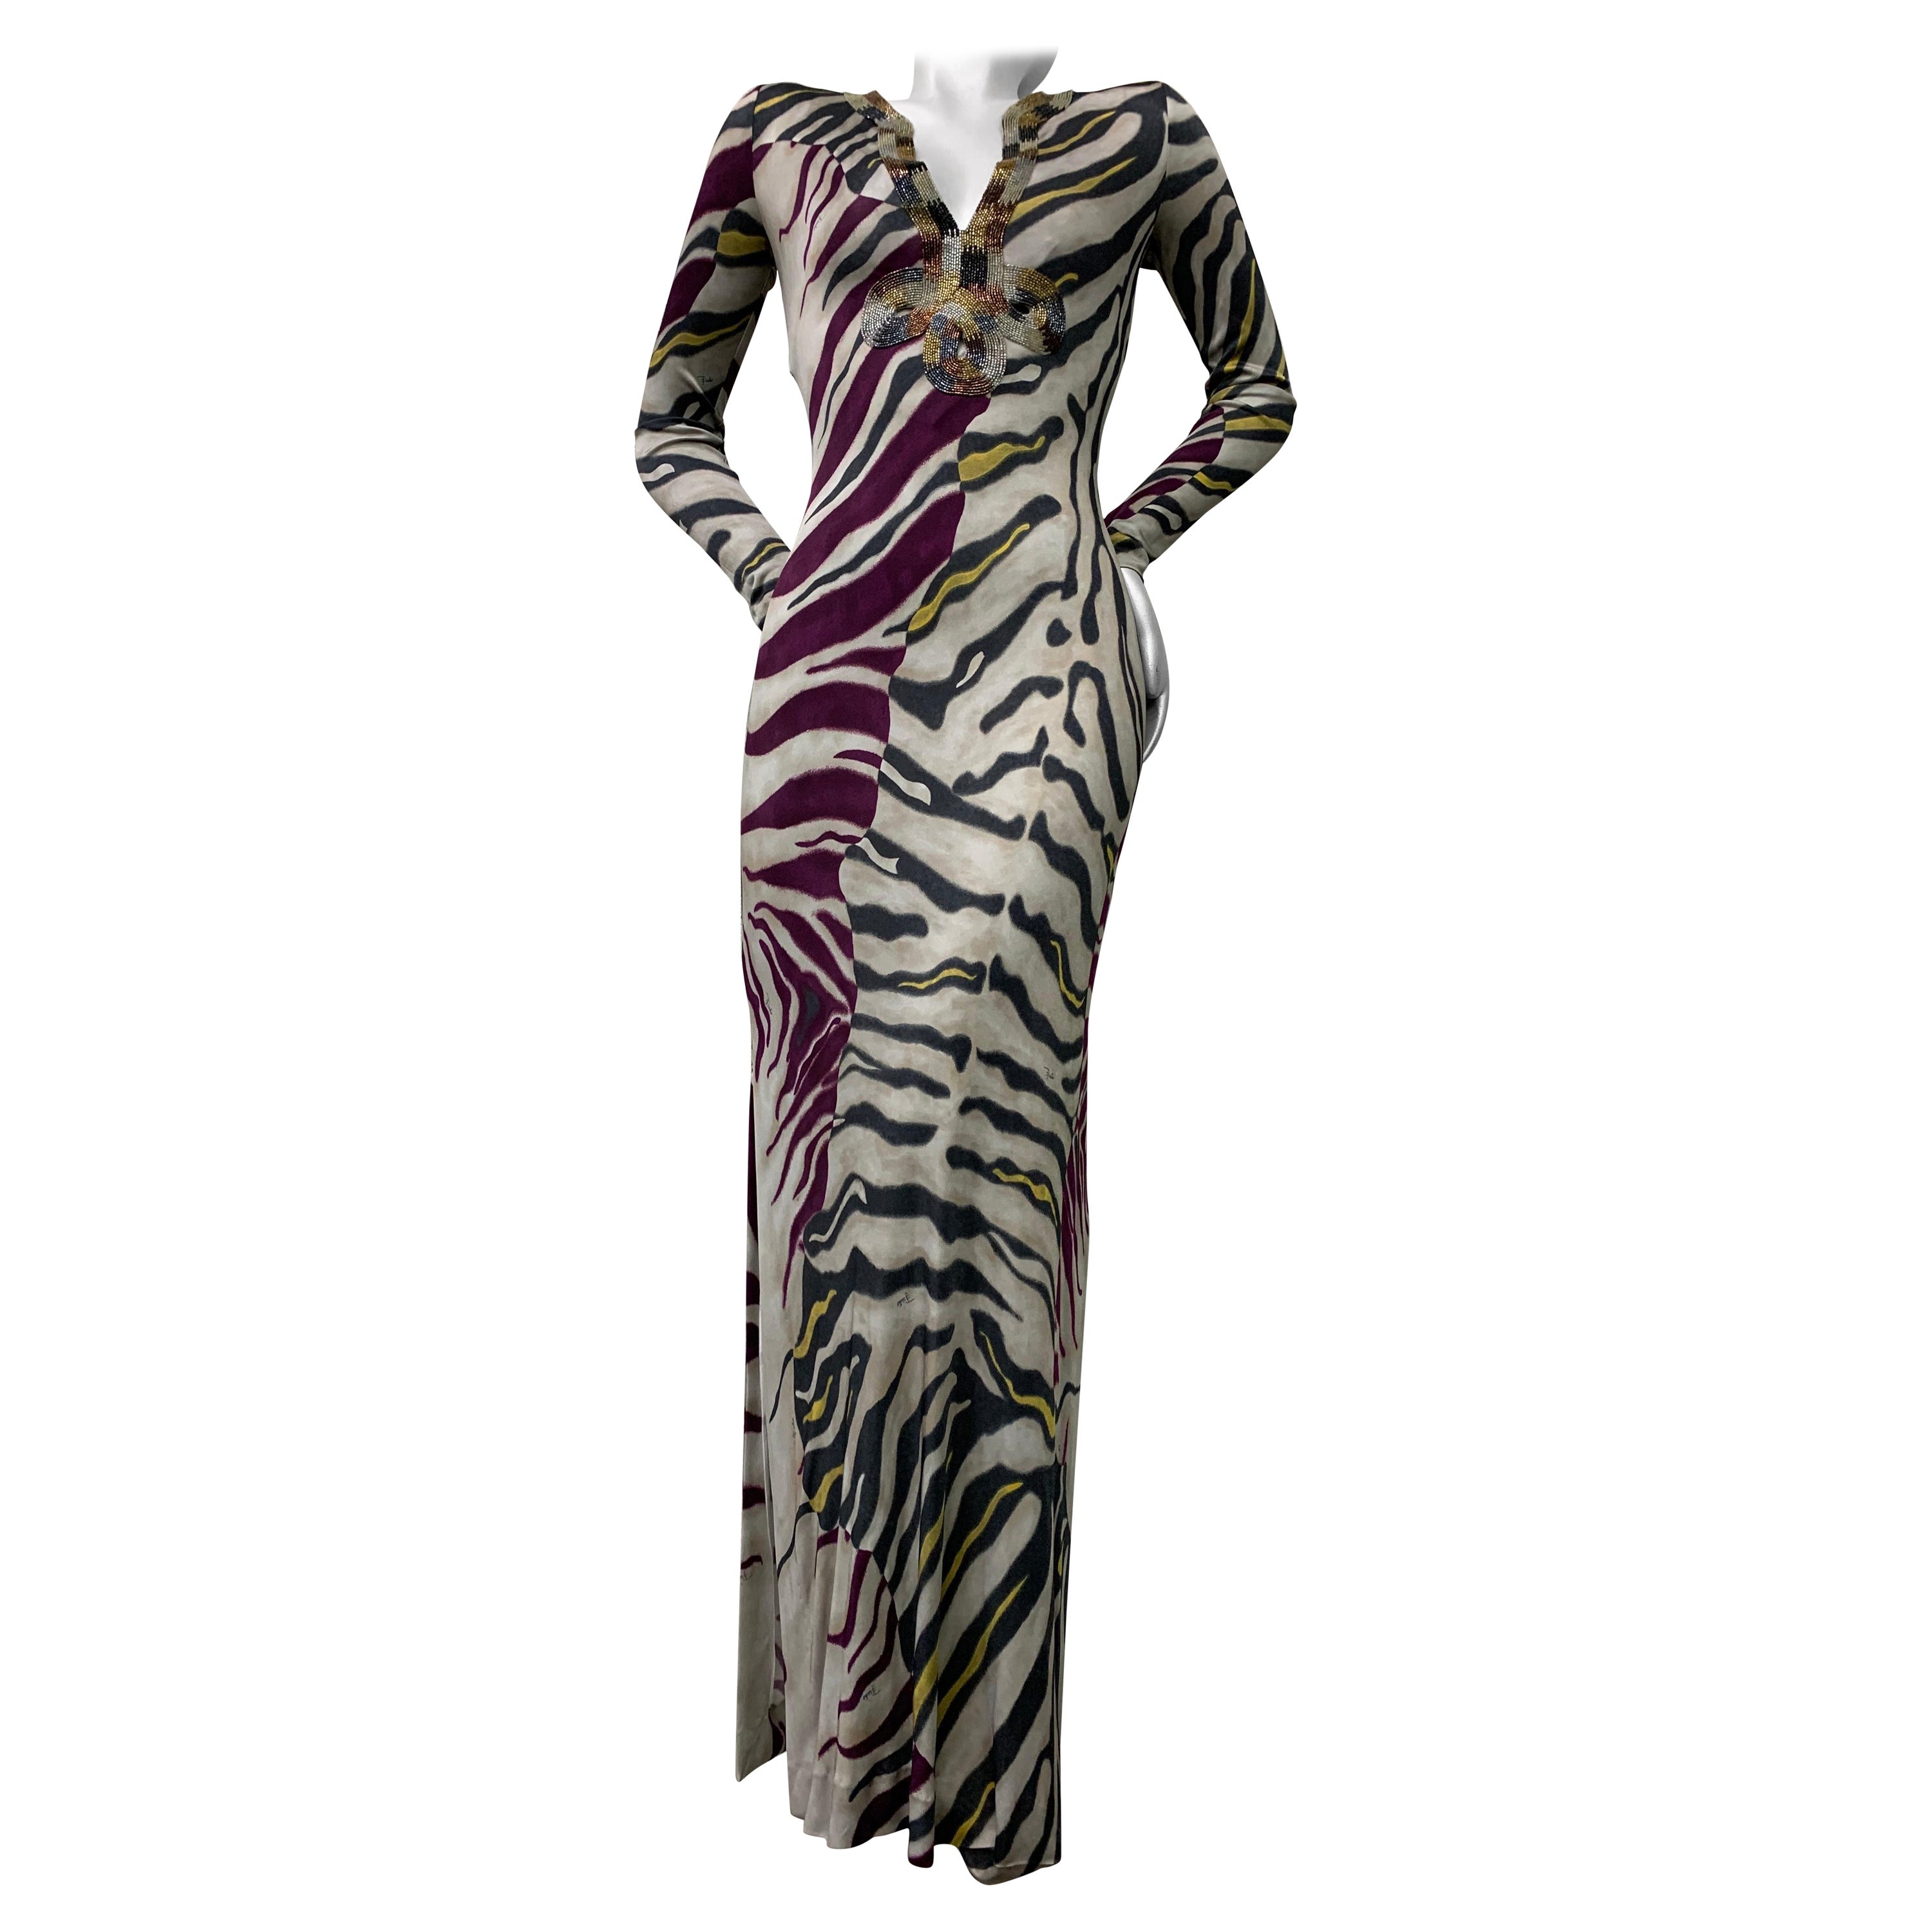 Emilio Pucci Stylized Zebra-Print Body-Conscious Beaded Maxi Dress in Rayon Knit For Sale